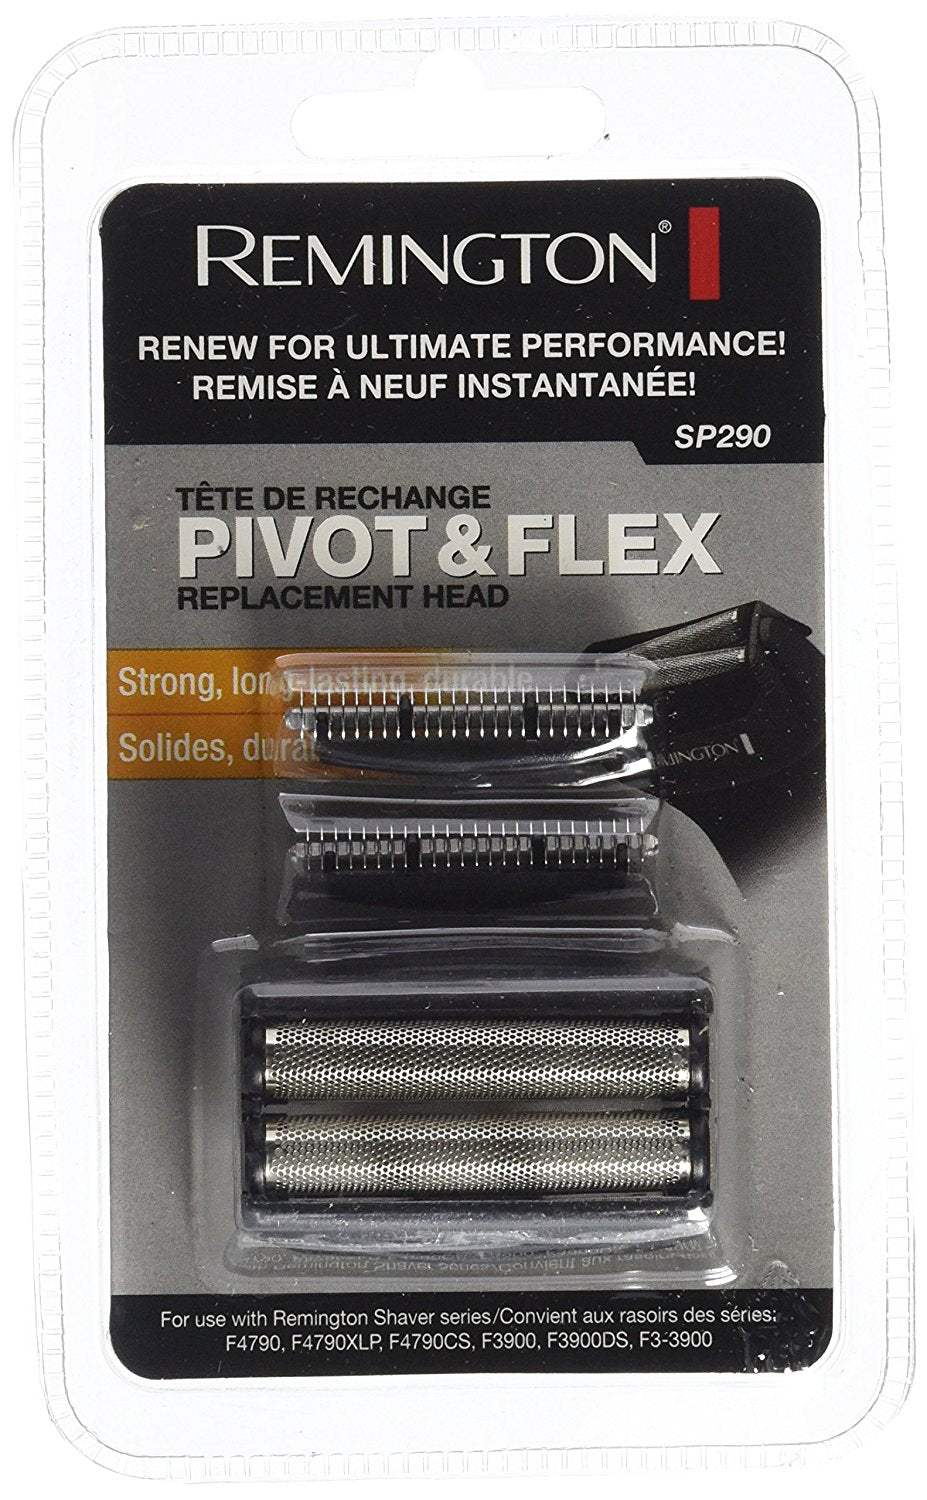 Buy remington sp290 replacement dual foils - Online store for personal care, accessories in USA, on sale, low price, discount deals, coupon code